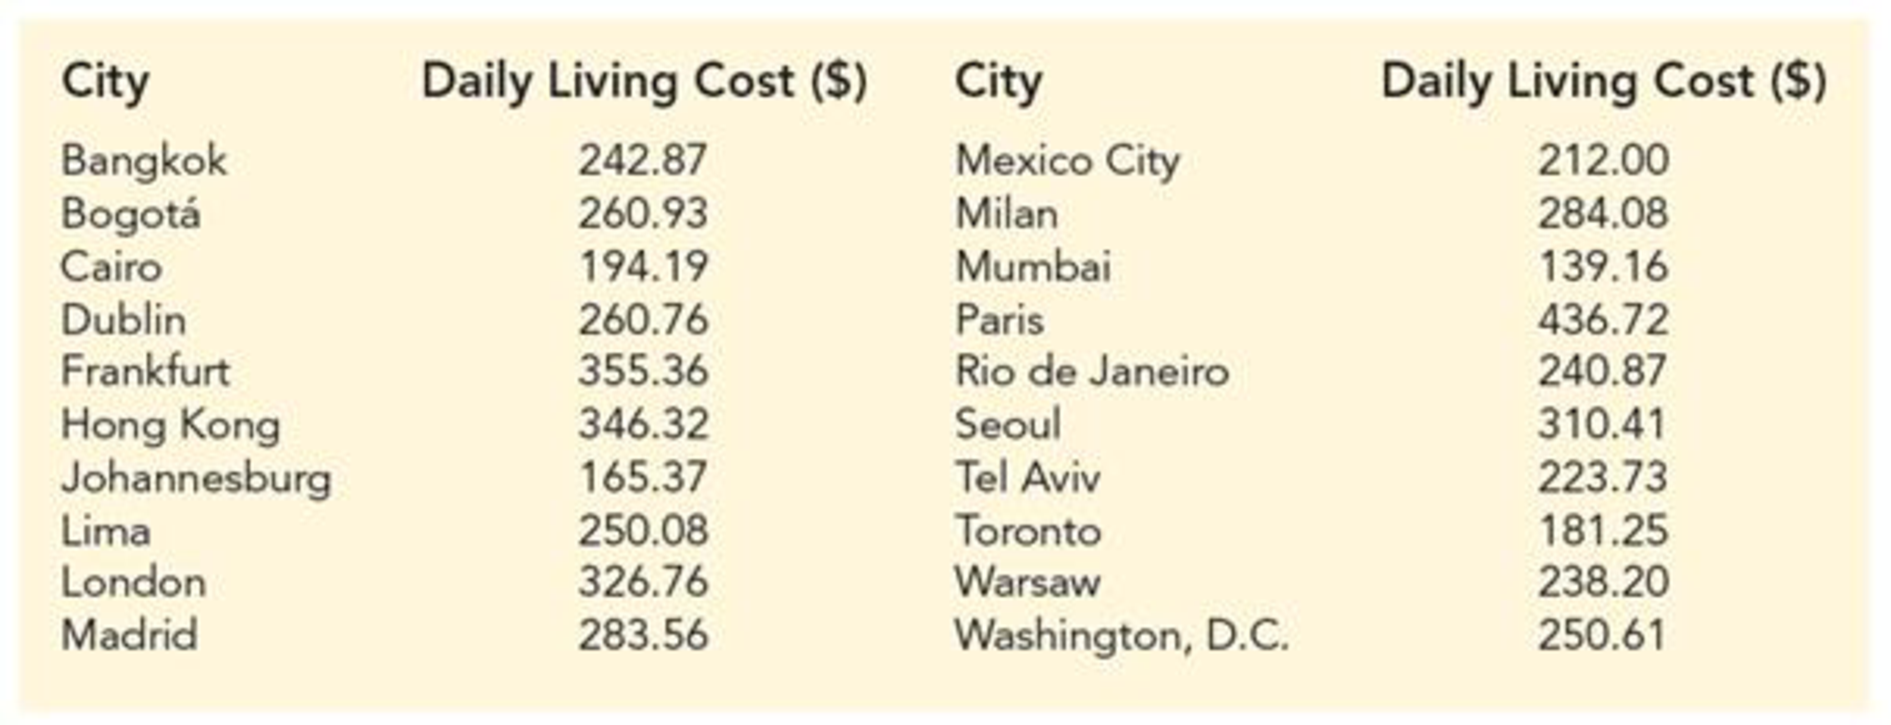 Chapter 11, Problem 25SE, Business Travel Costs. According to the 2017 Corporate Travel Index compiled by Business Travel 